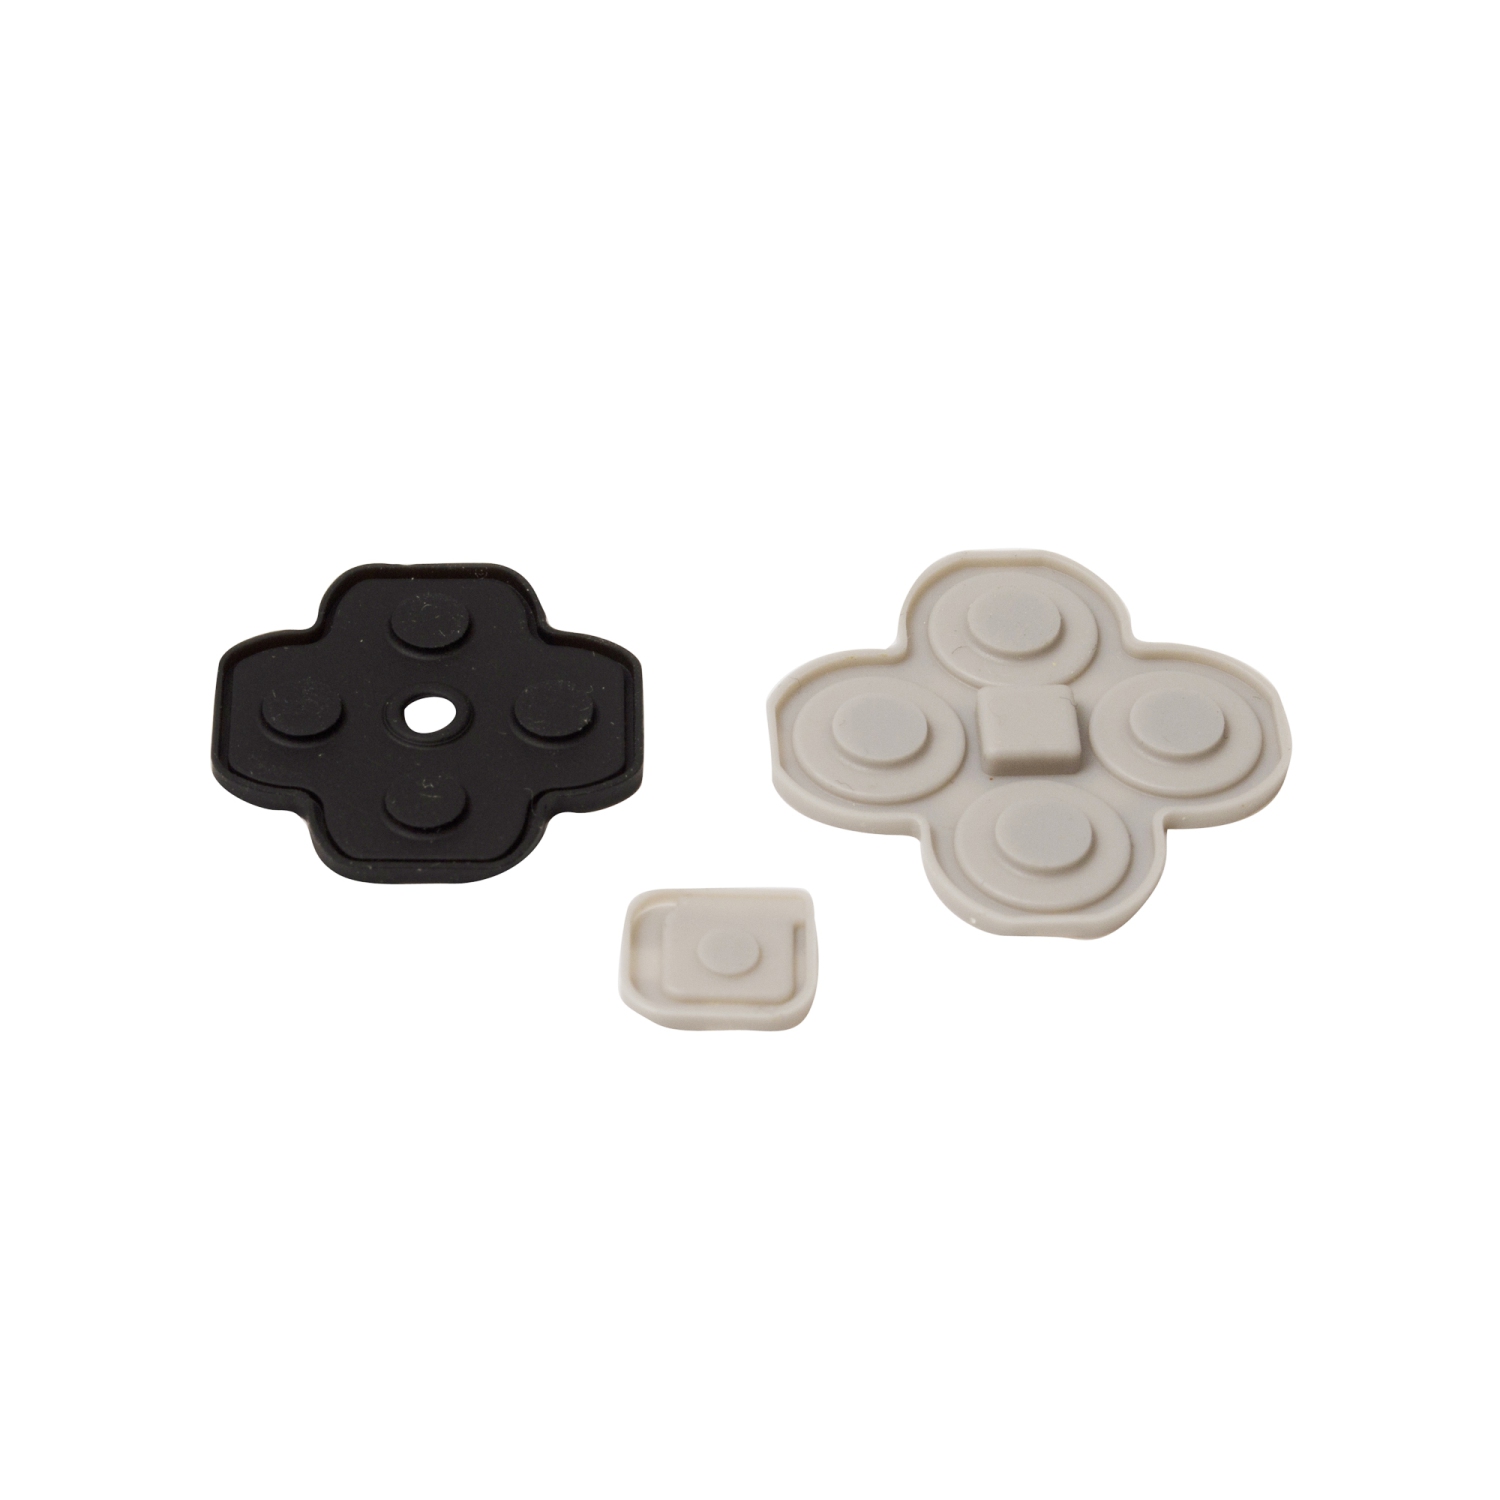 Nintendo 3DS Replacement Button Pads - Rubber Button Covers